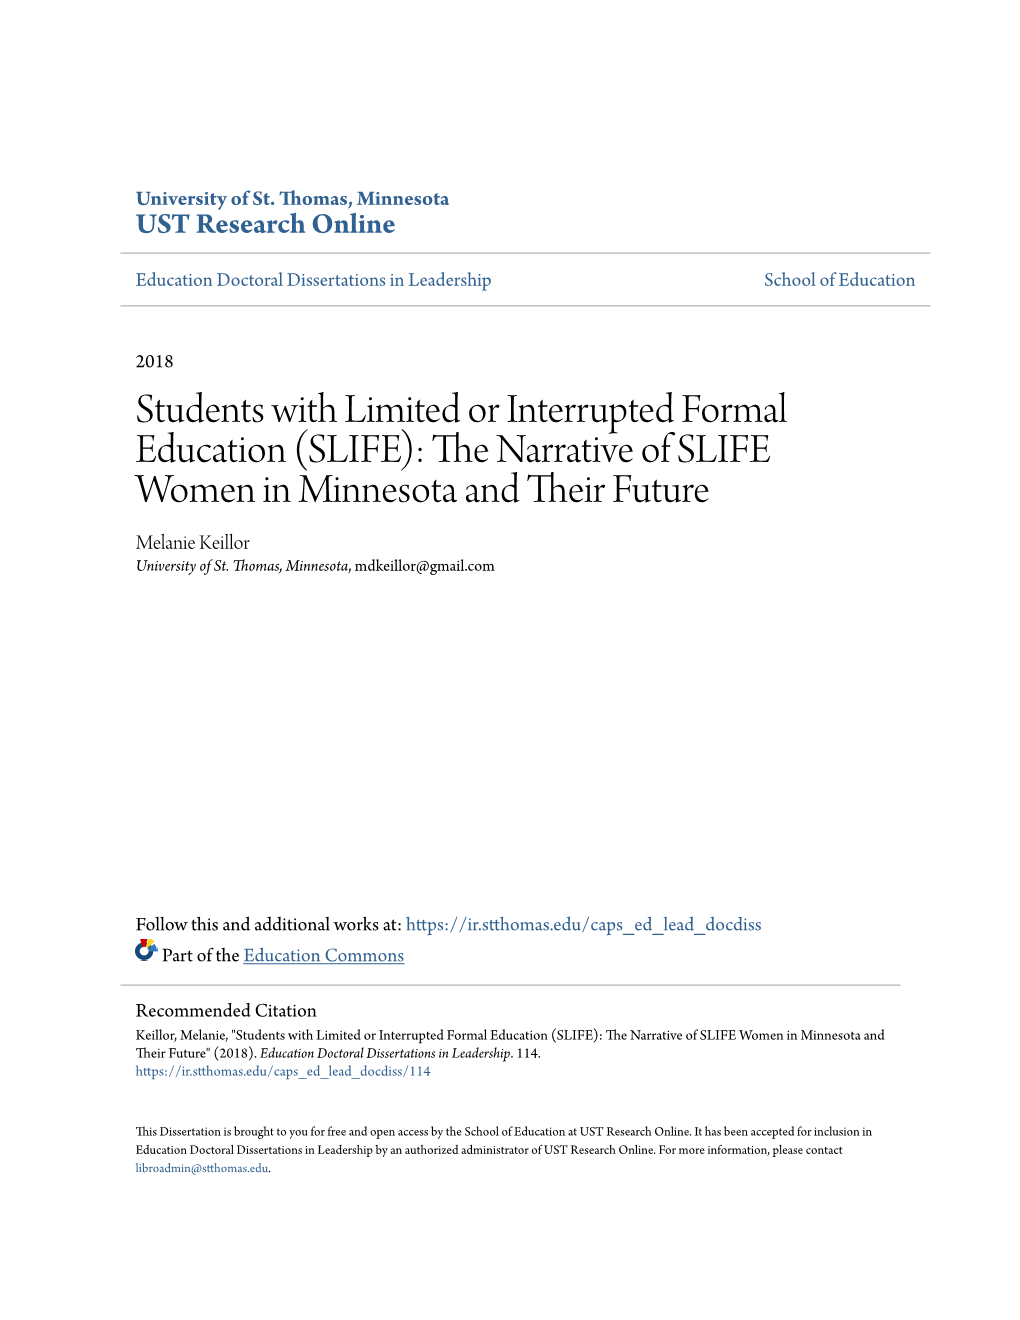 Students with Limited Or Interrupted Formal Education (SLIFE): the an Rrative of SLIFE Women in Minnesota and Their Uturf E Melanie Keillor University of St